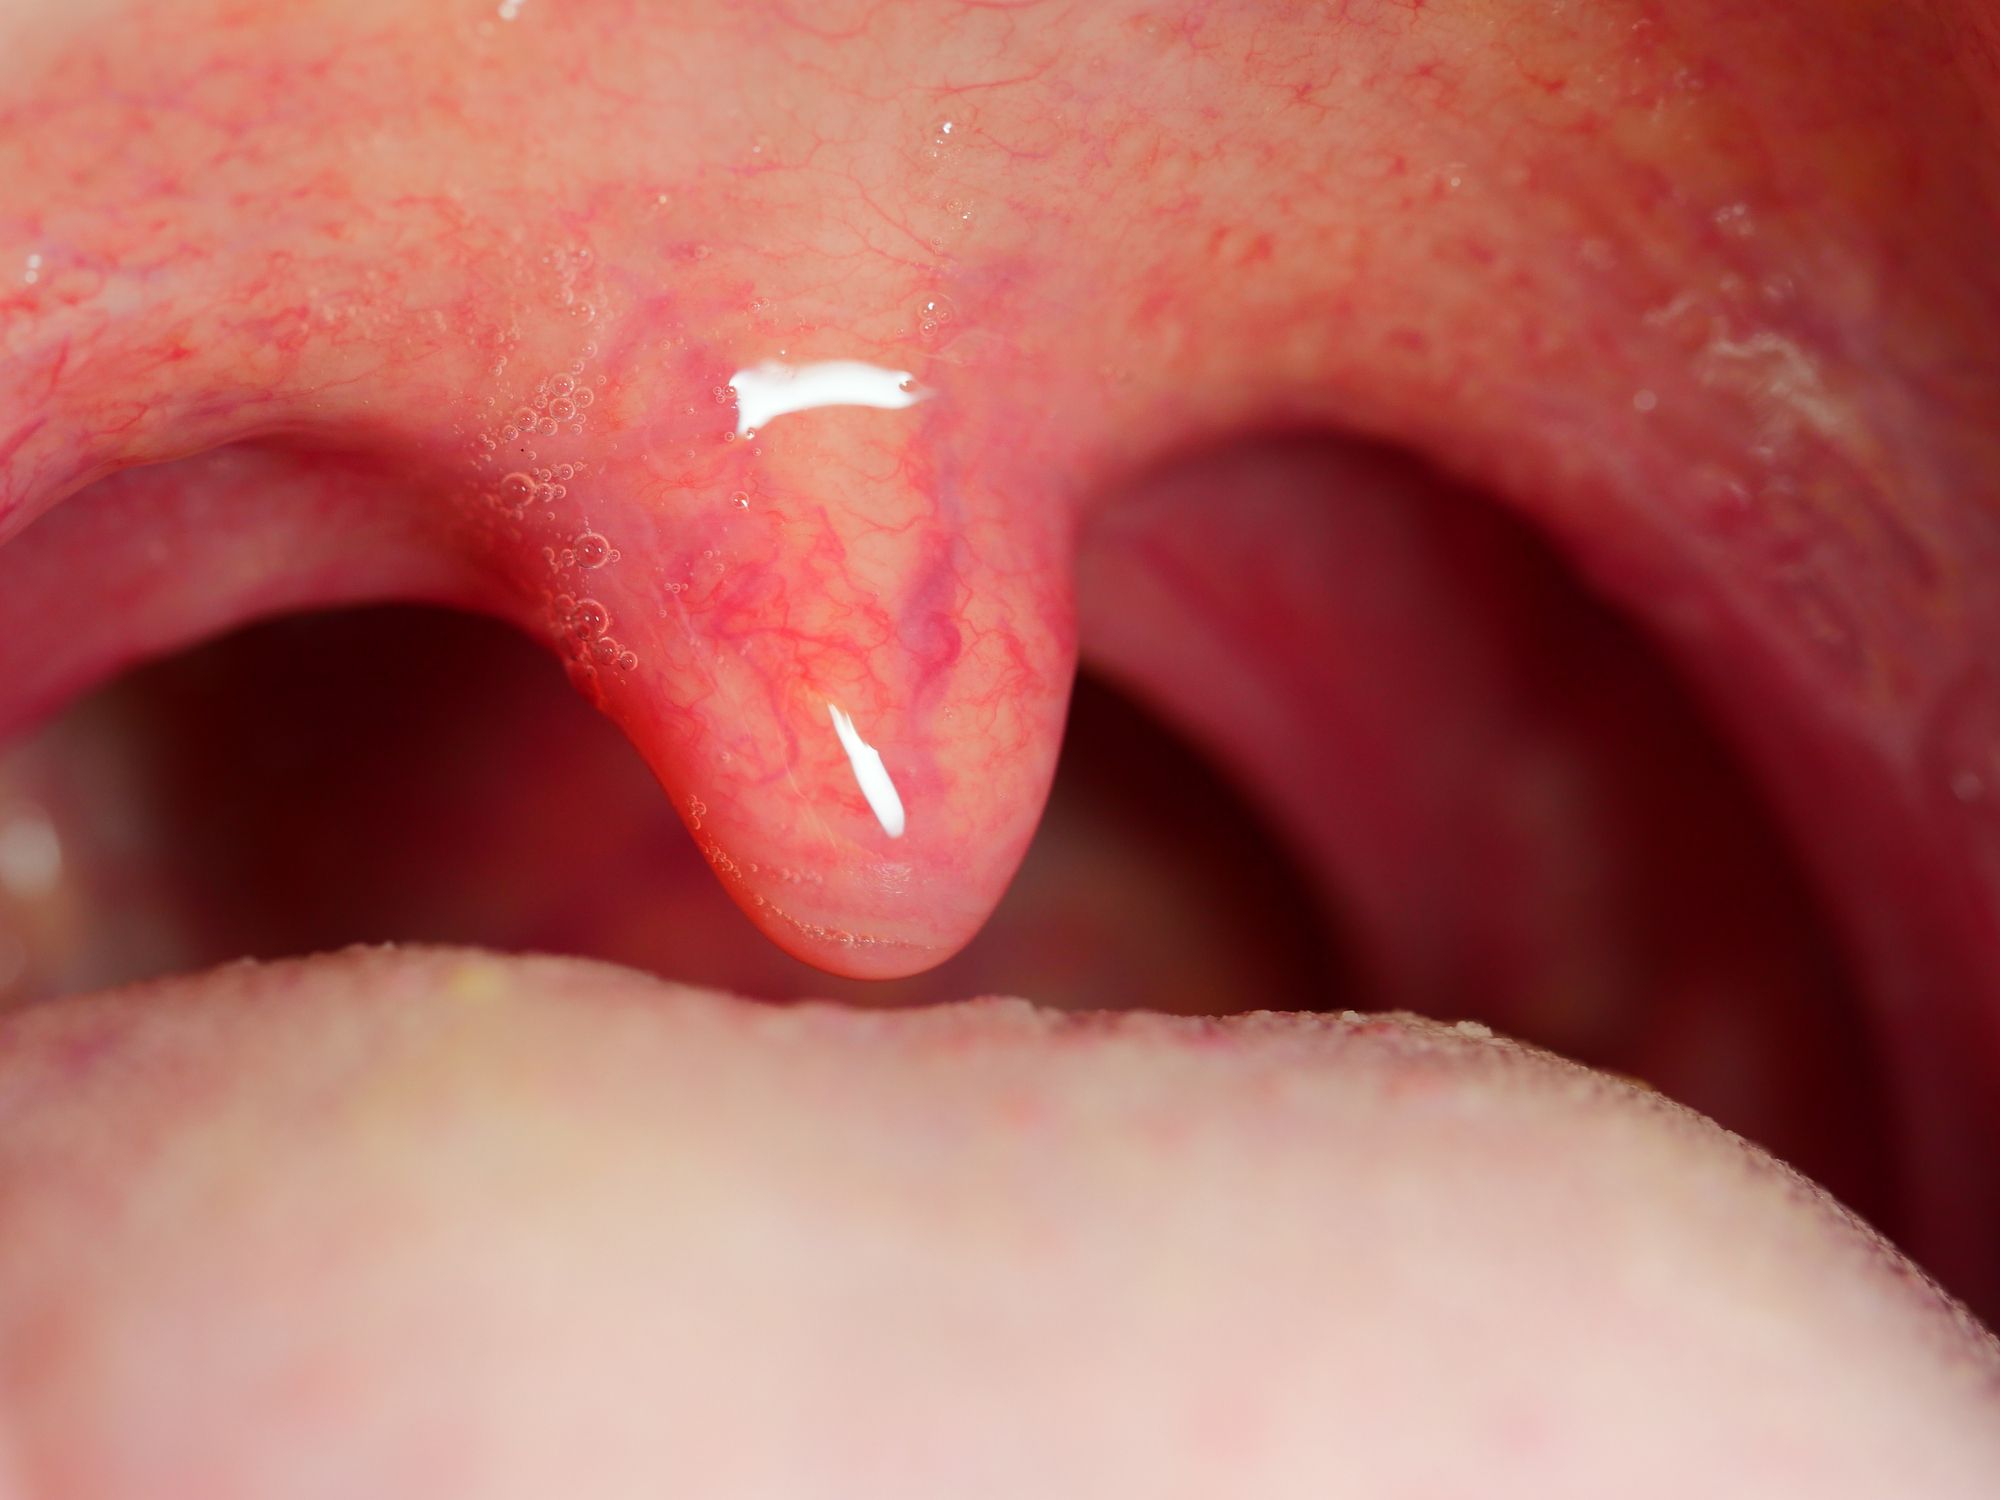 Hpv and uvula